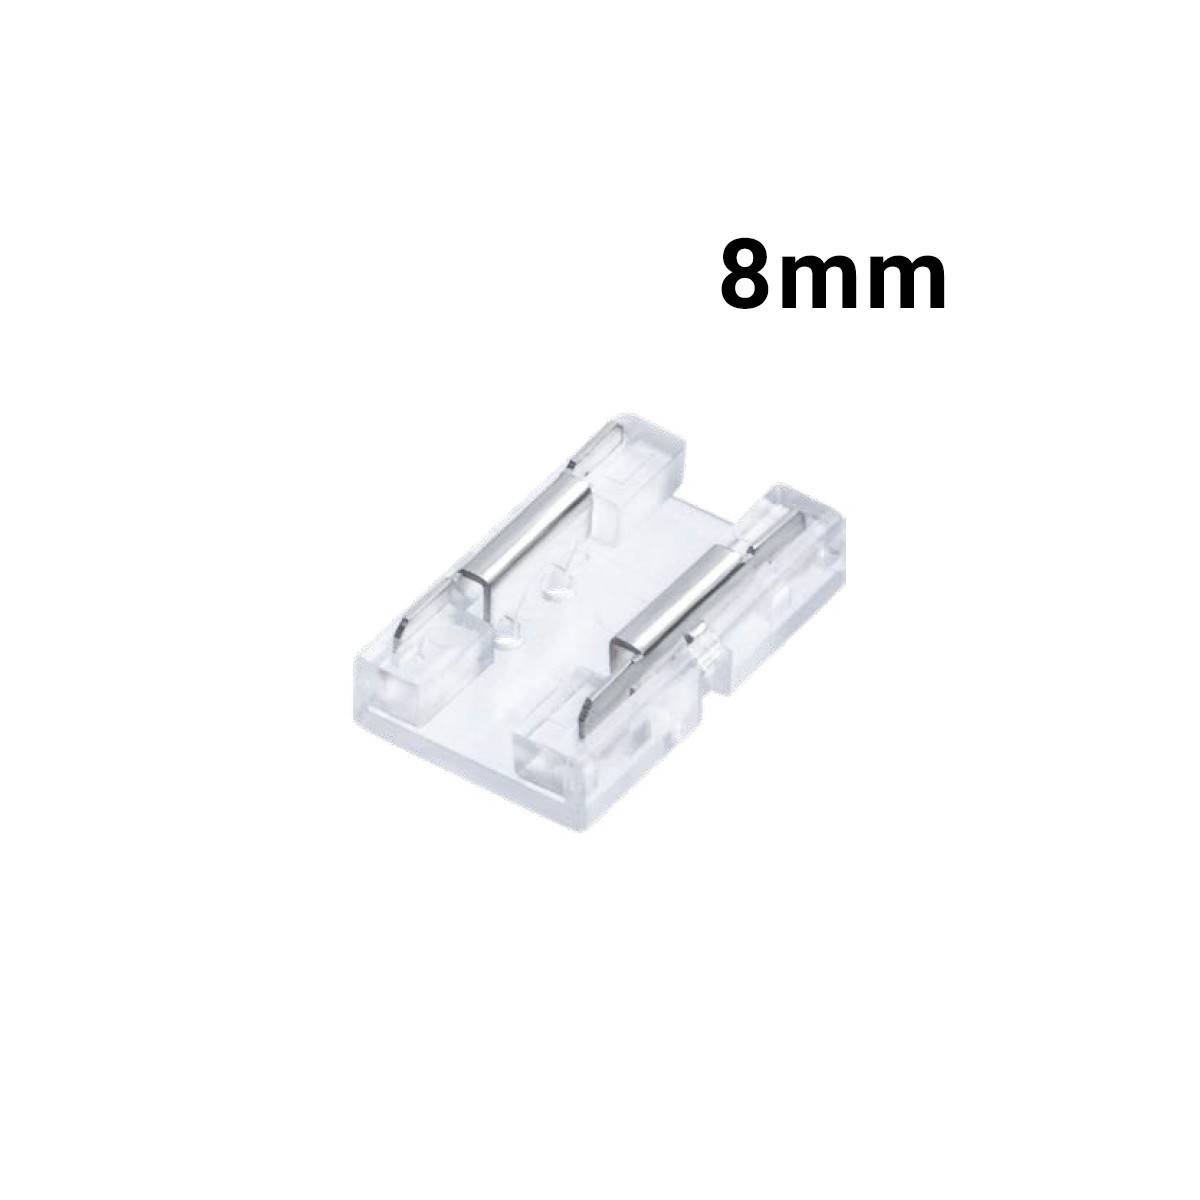 Quick connector CLIP INVISIBLE 2 pin strip to strip connection single color 8mm IP20